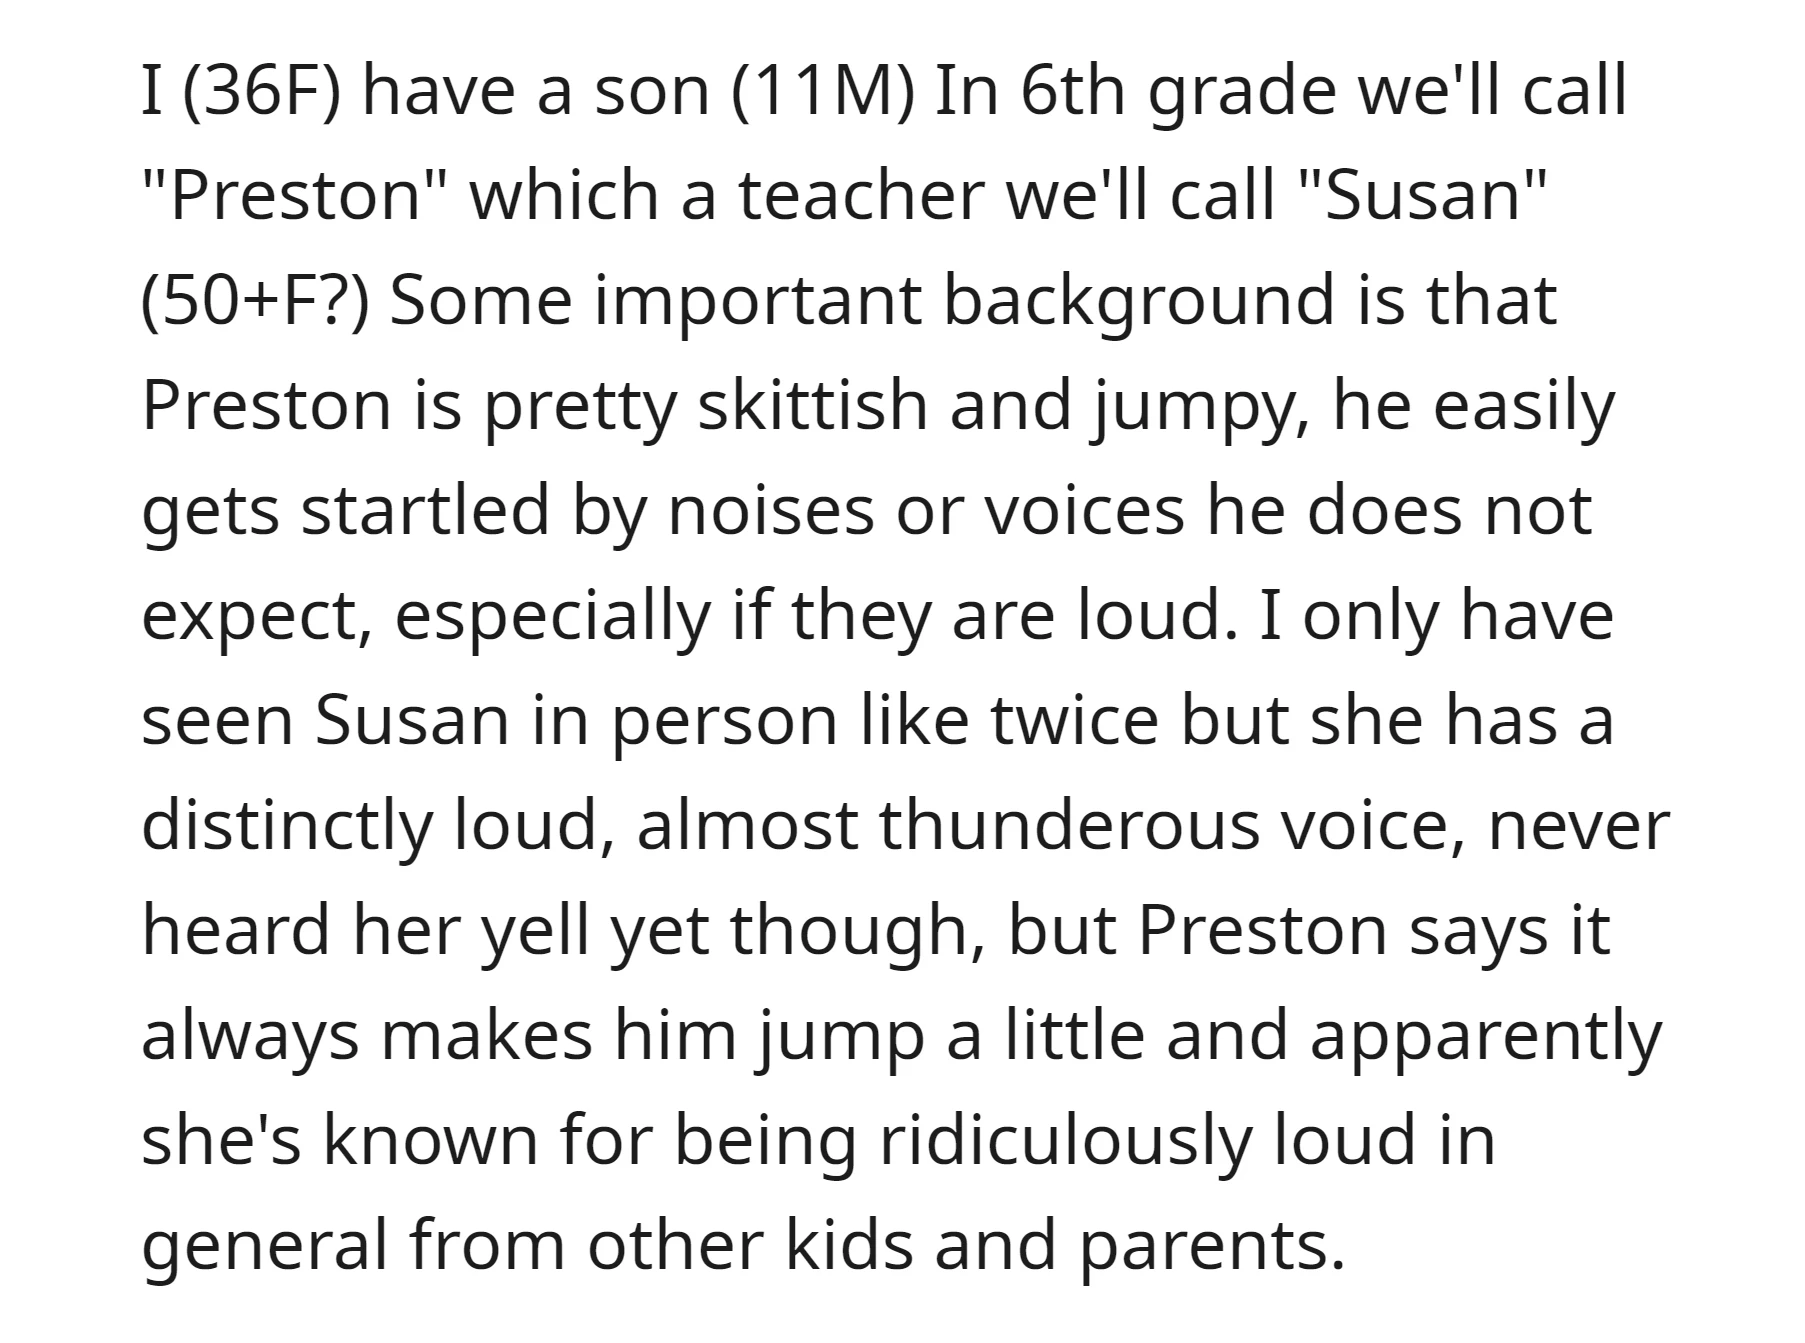 OP's son has a teacher whose consistently loud voice startles him due to his skittish nature